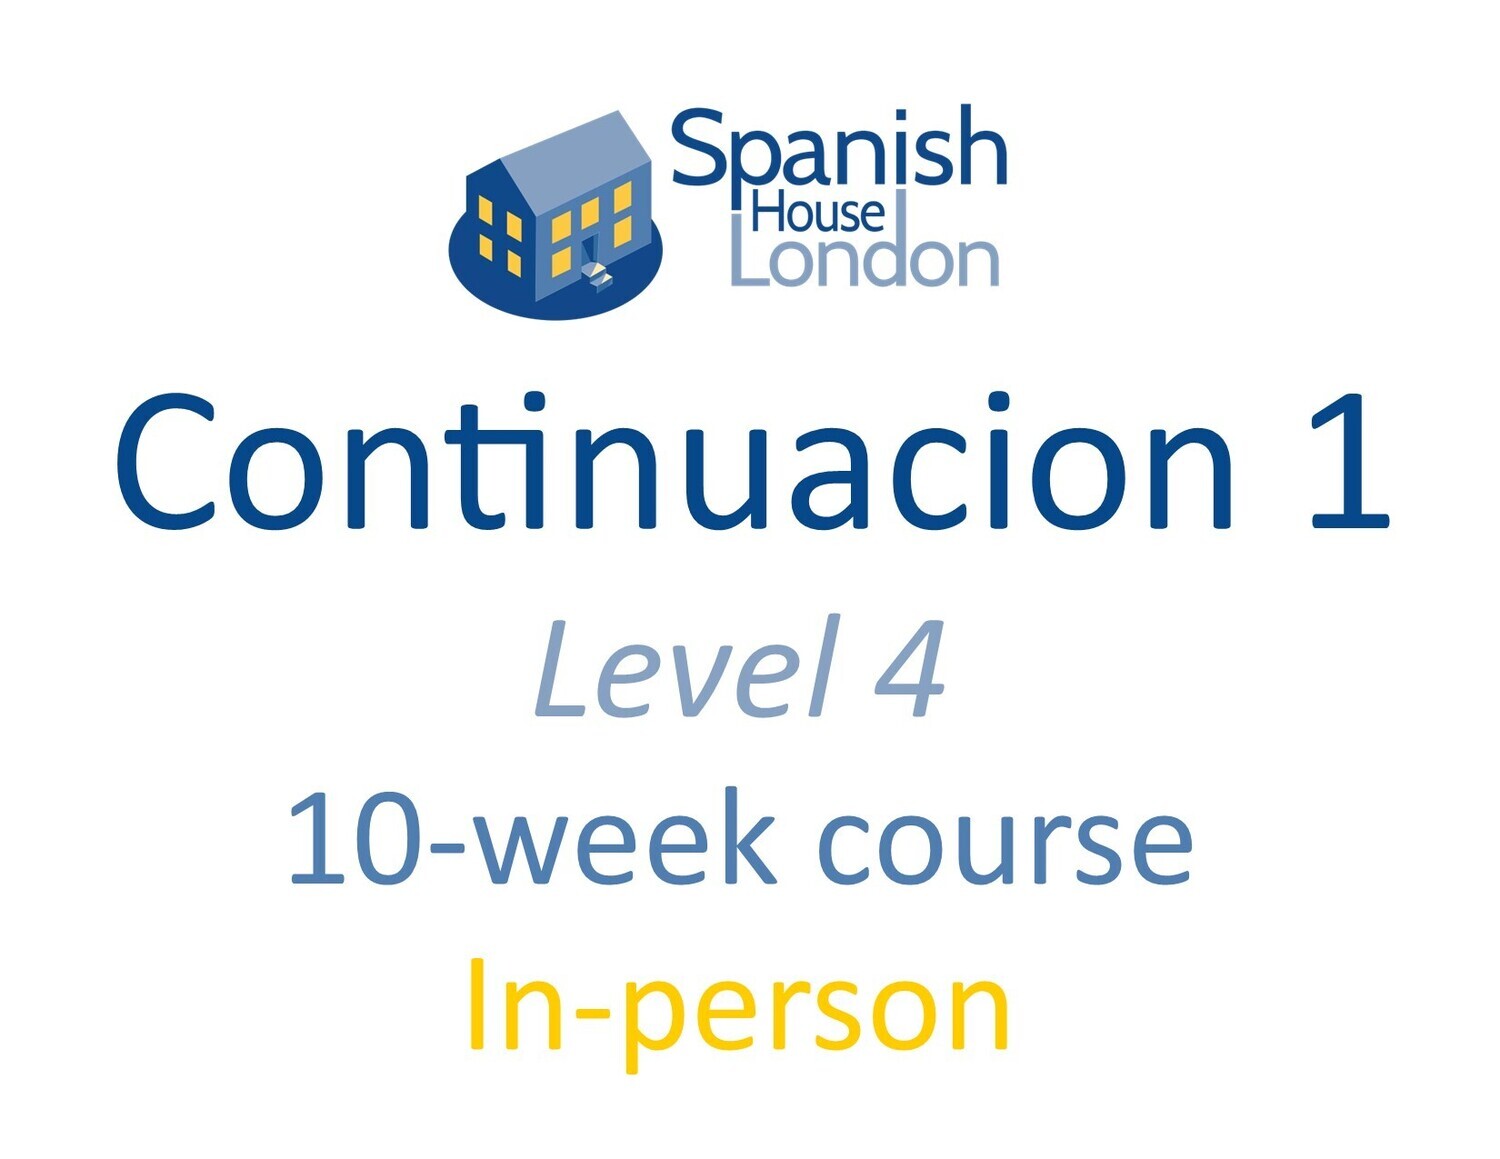 Continuacion 1 Course starting on 30th August at 6pm in Clapham North